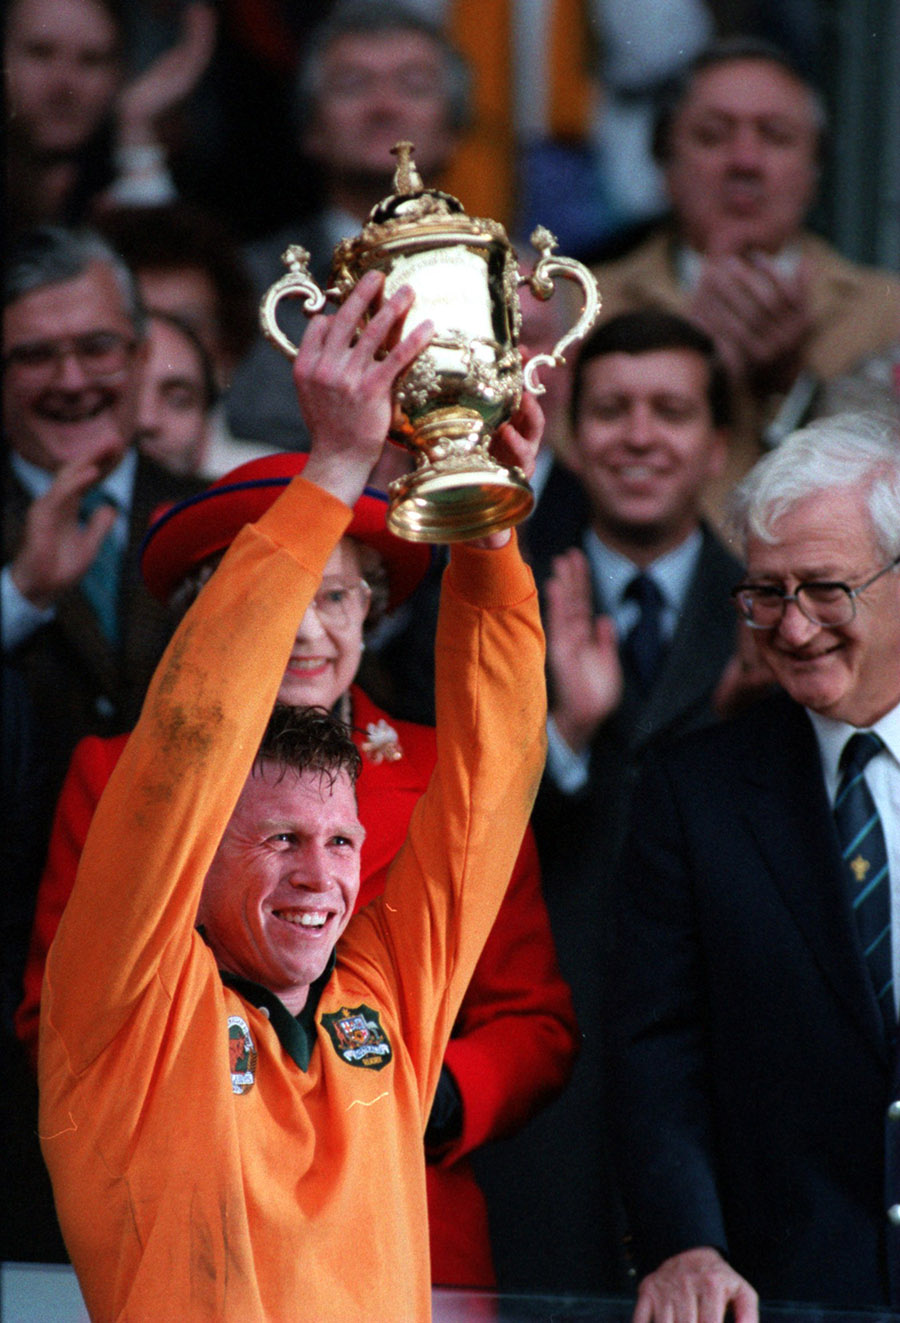 Wallabies captain Nick Farr-Jones lifts the Webb Ellis trophy after the Wallabies defeated England in the 1991 Rugby World Cup final